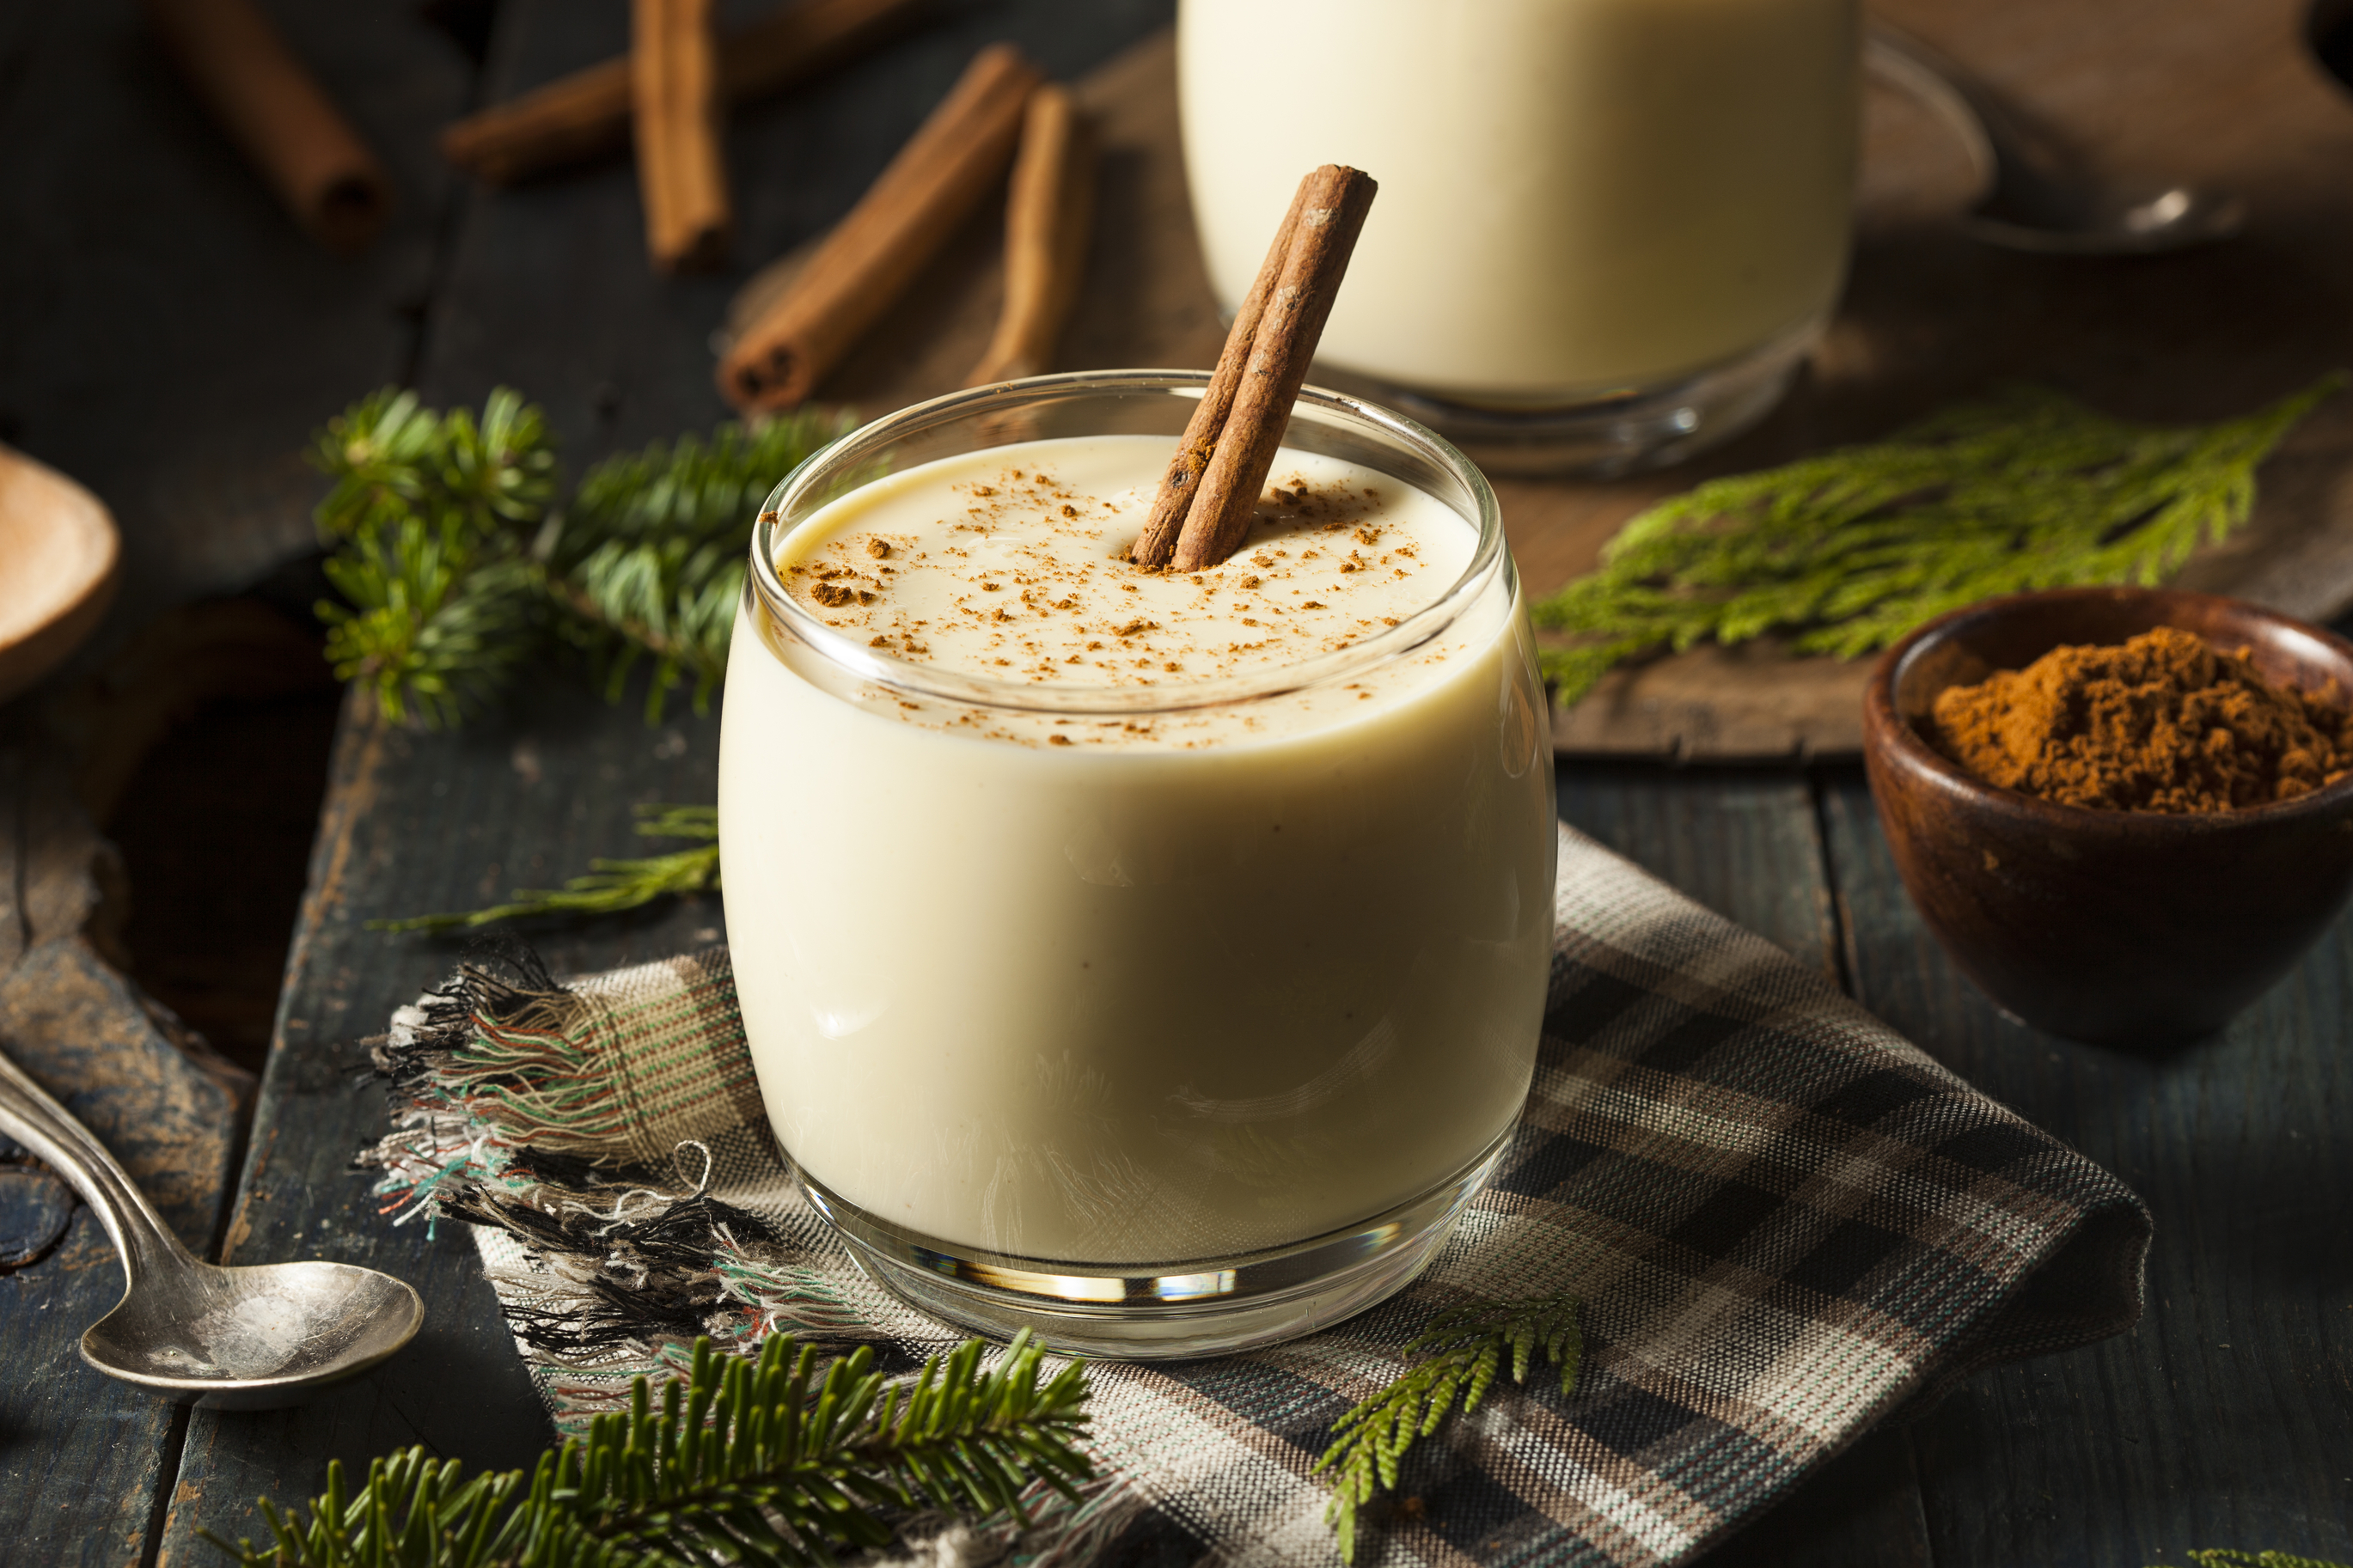 Glass of eggnog next to a bowl of ground cinnamon on a table decorated with pine tree branches and plaid napkins.